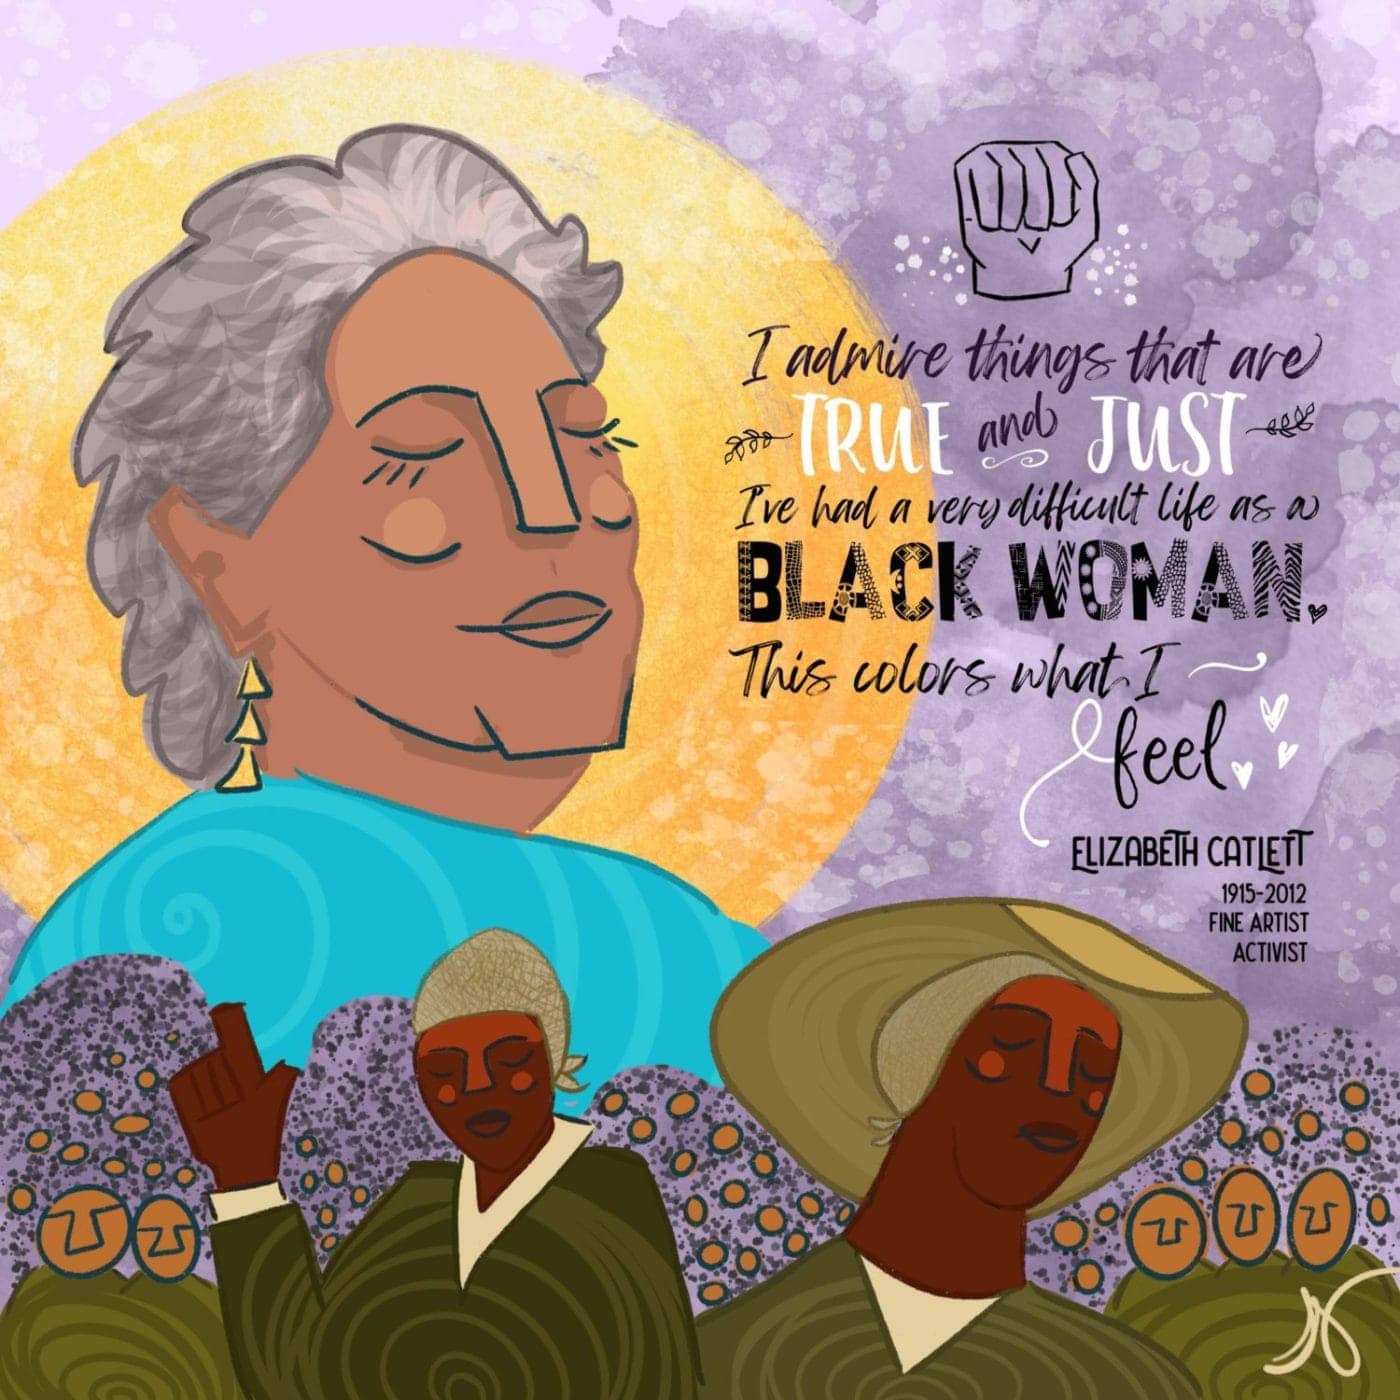 Elizabeth-Catlett-portrait-by-Tiffany-Golden-in-SOL-Affirmations-1400x1400, Children’s book author Tiffany Golden used the pandemic to learn the art of illustrating￼, Culture Currents News & Views 